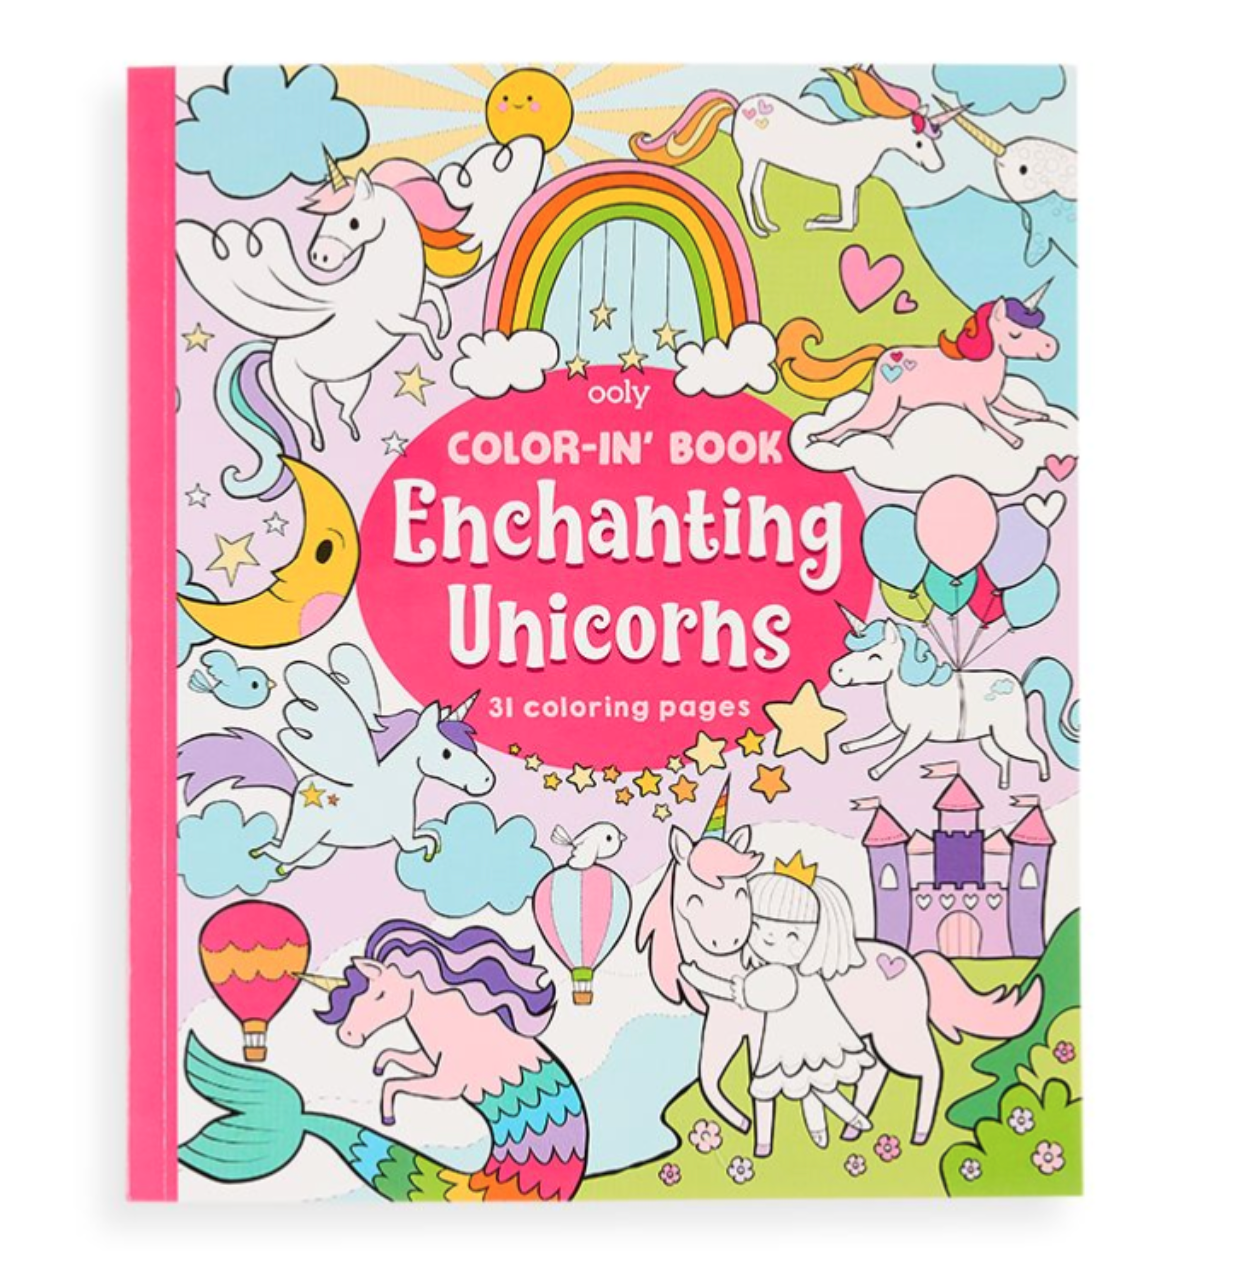 OOLY - Color-in' Book: Enchanting Unicorns